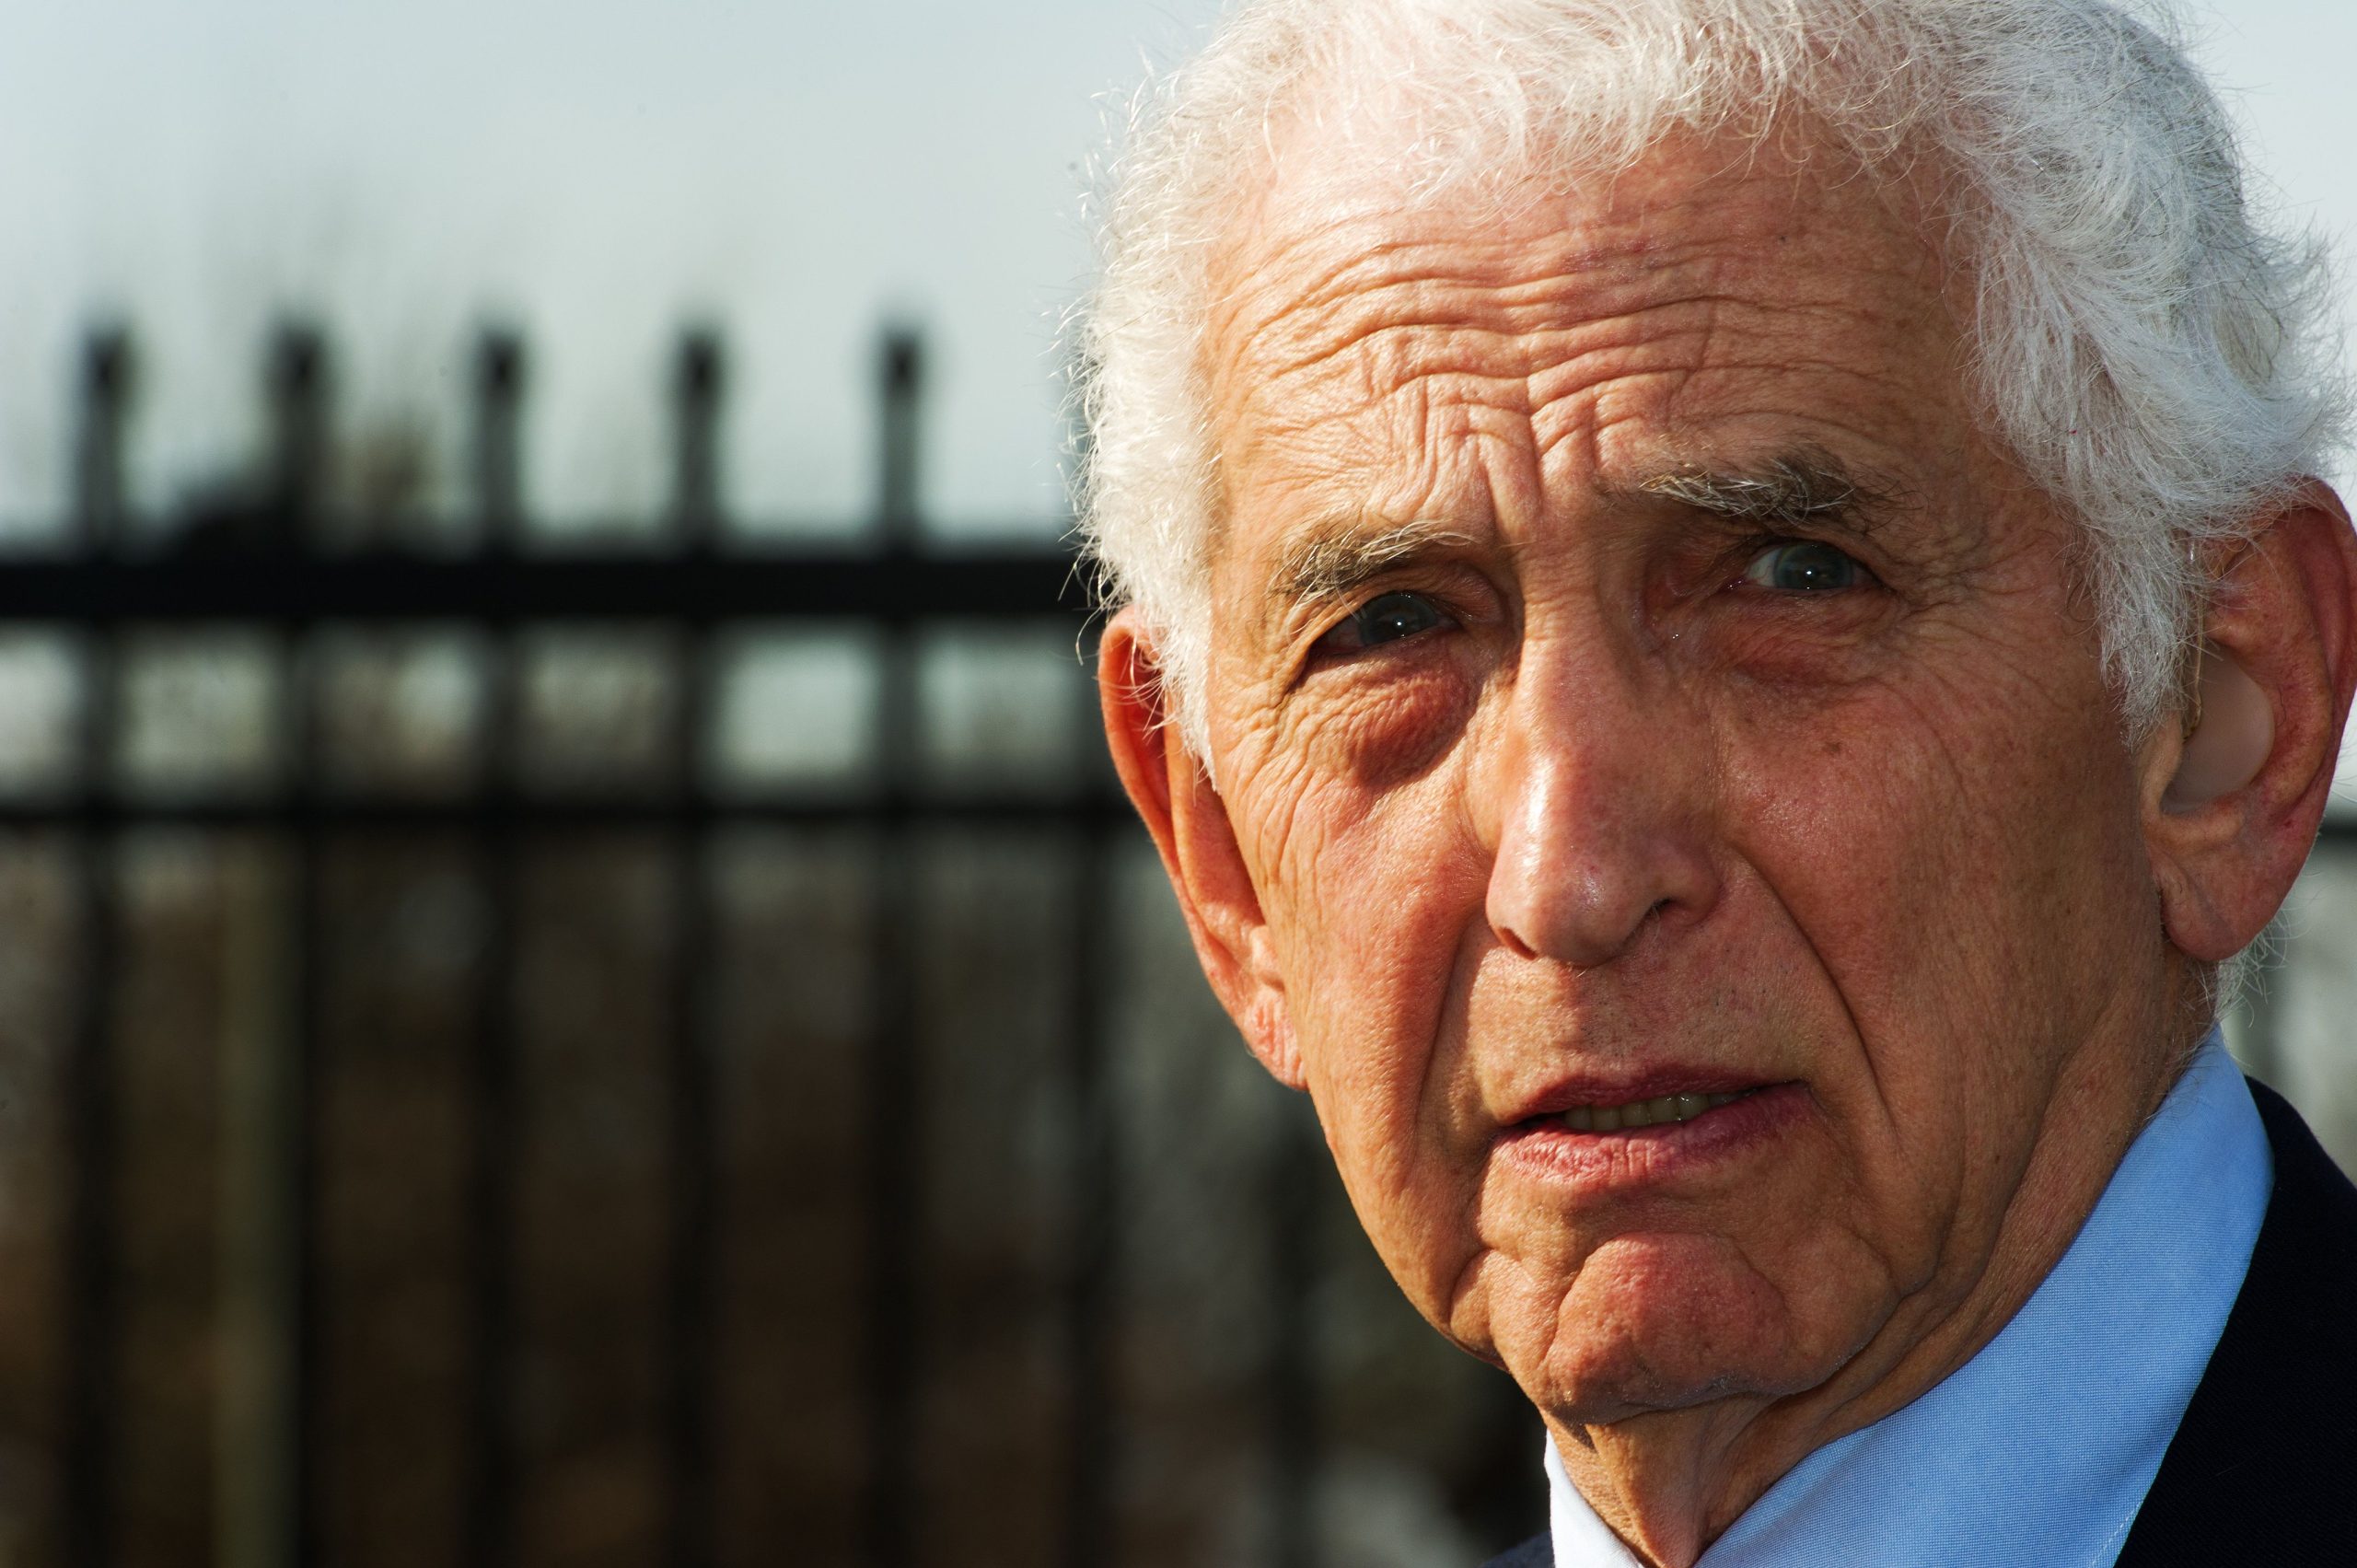 Ellsberg: The Whistleblower who Exposed the Government's Deception and Changed History Forever. 14